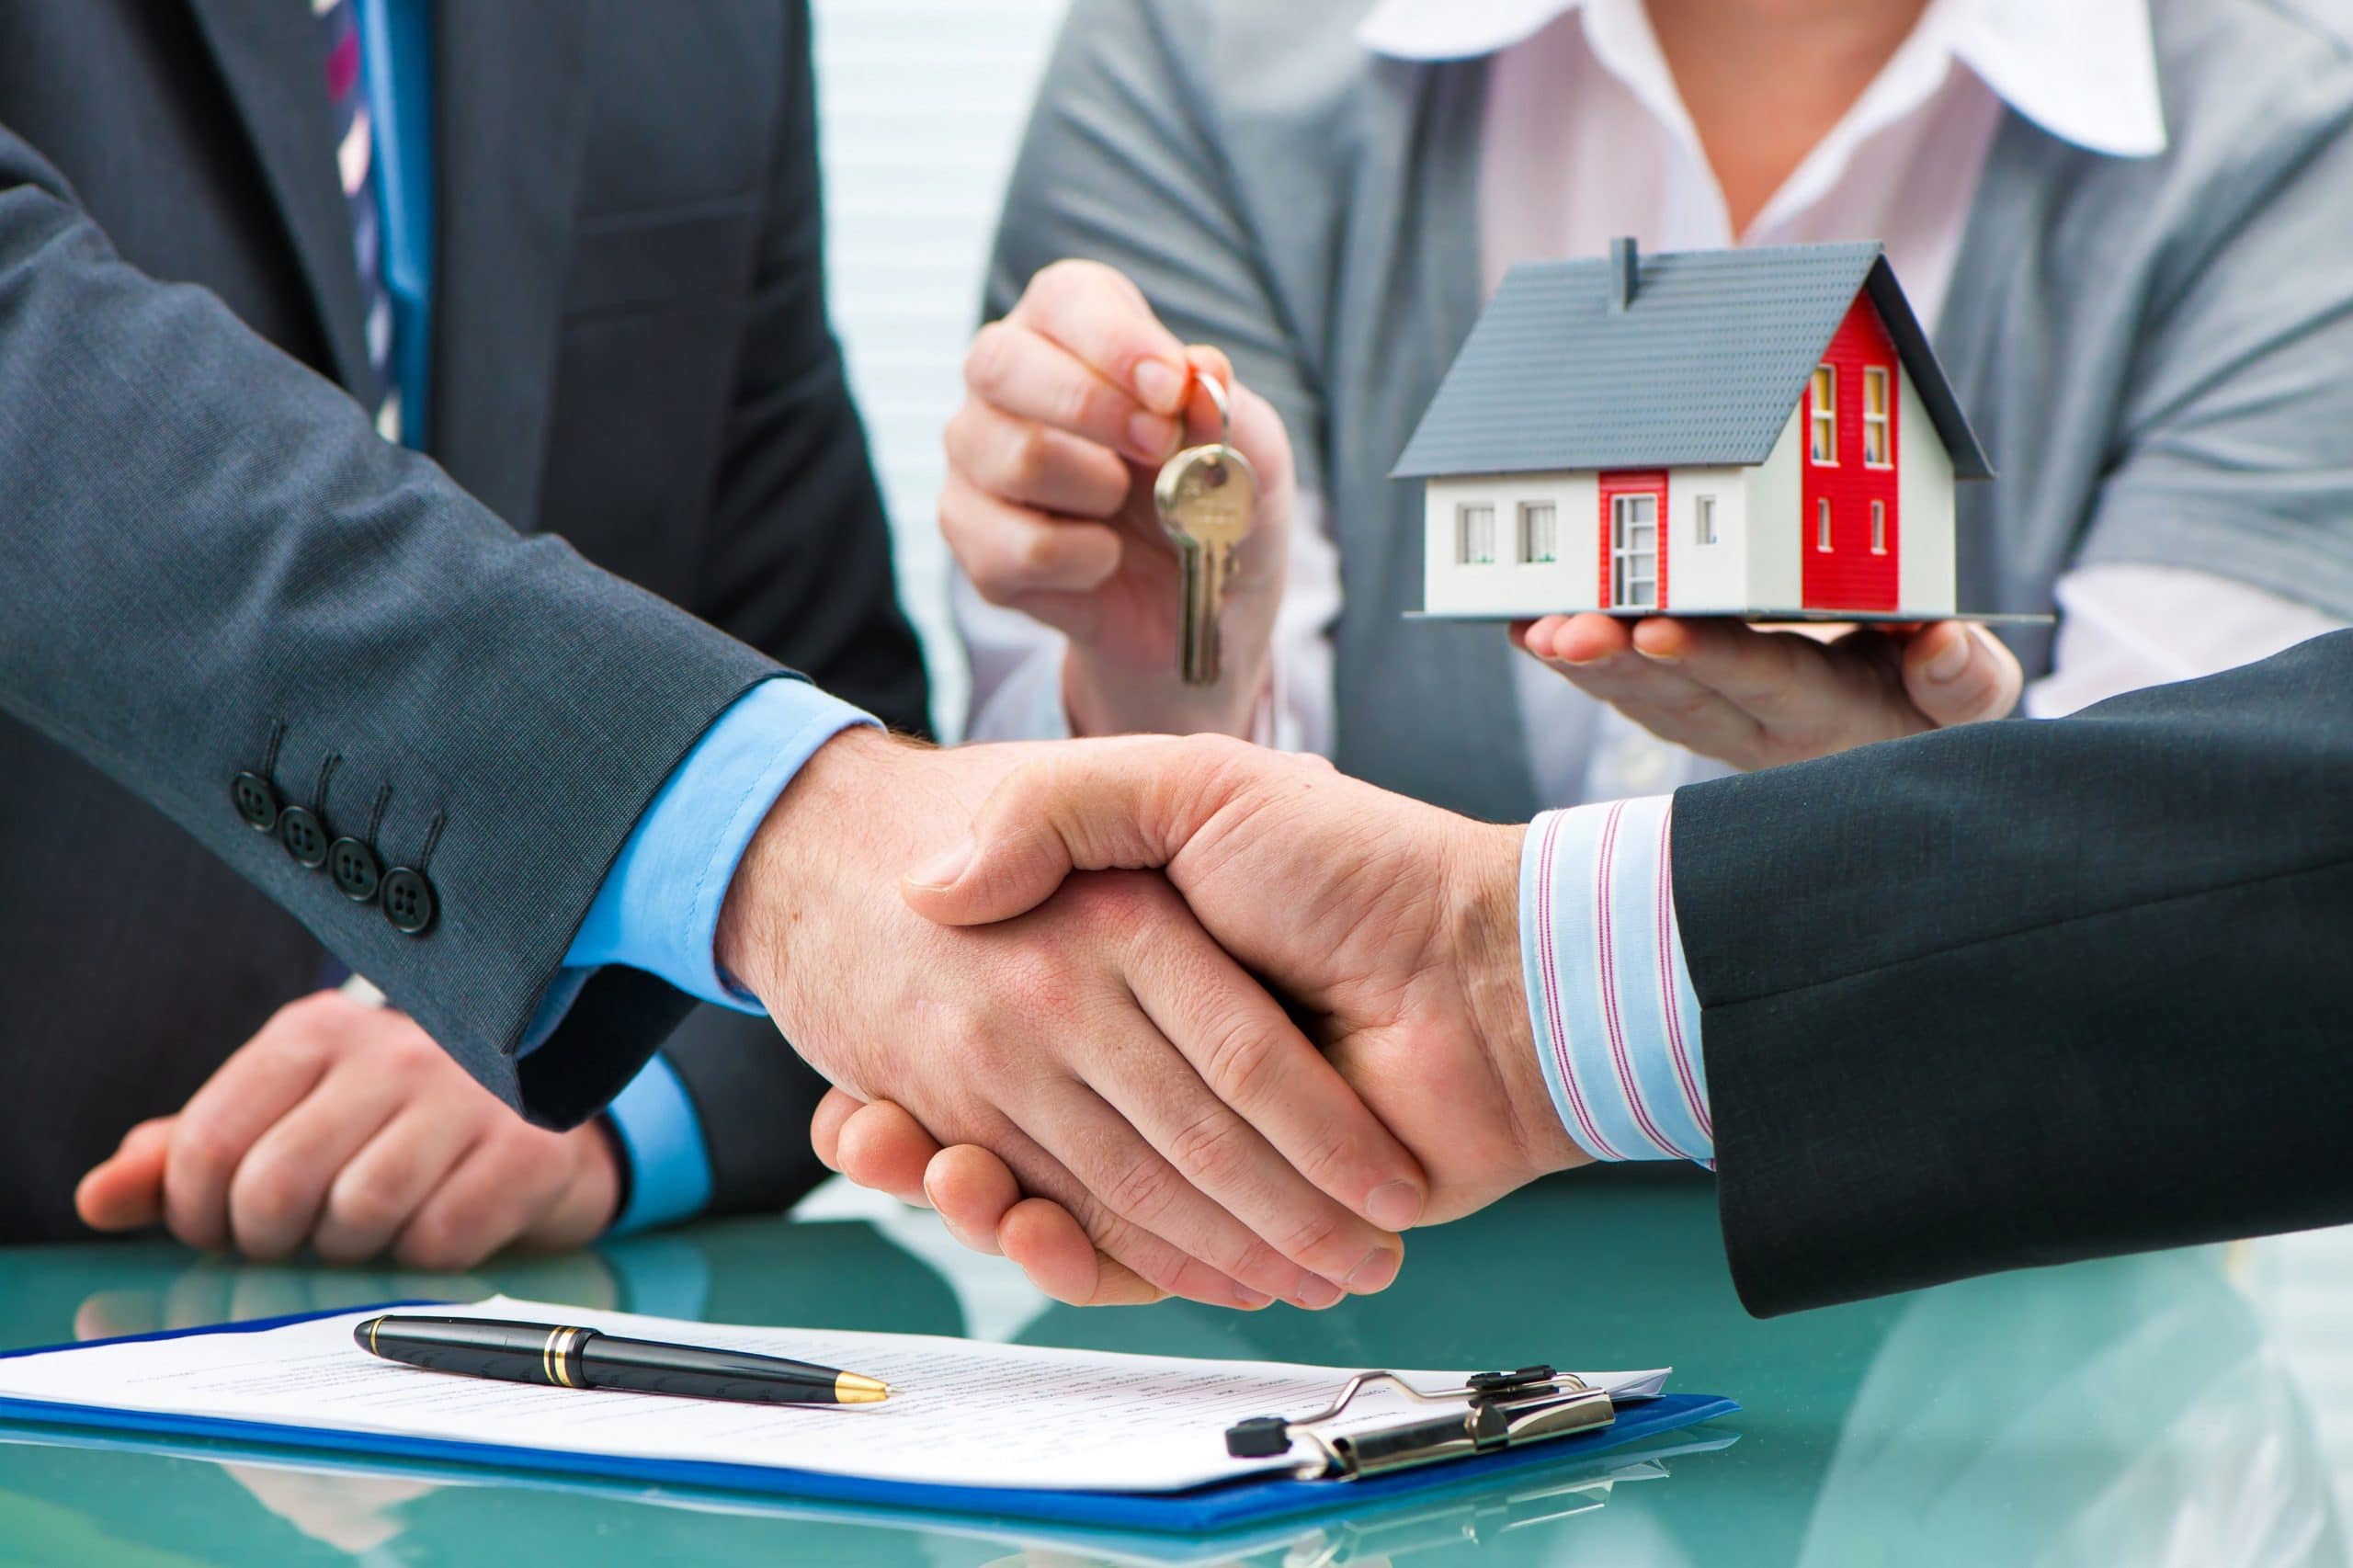 How to properly negotiate the purchase of a house?